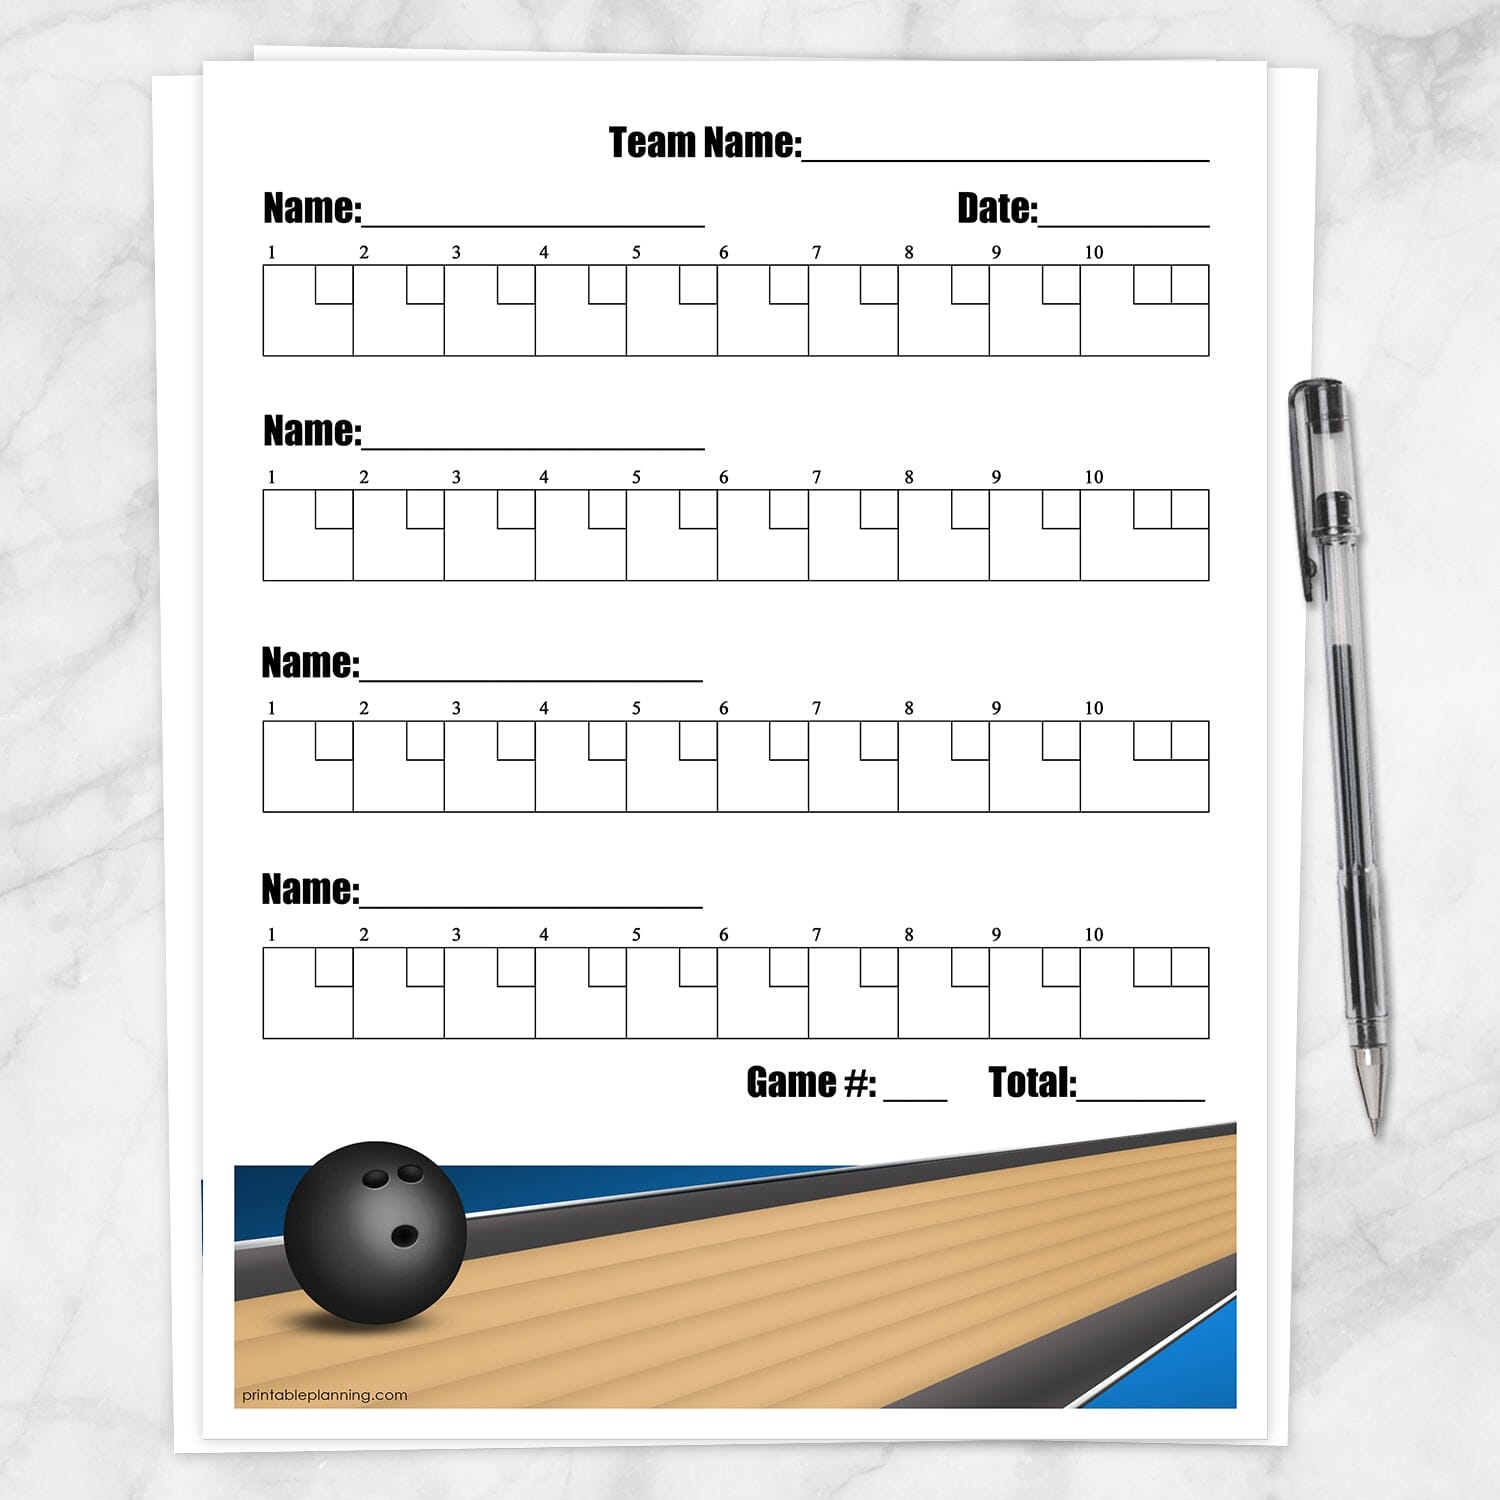 Blue Score Sheet - Printable at Printable Planning for only 5.95